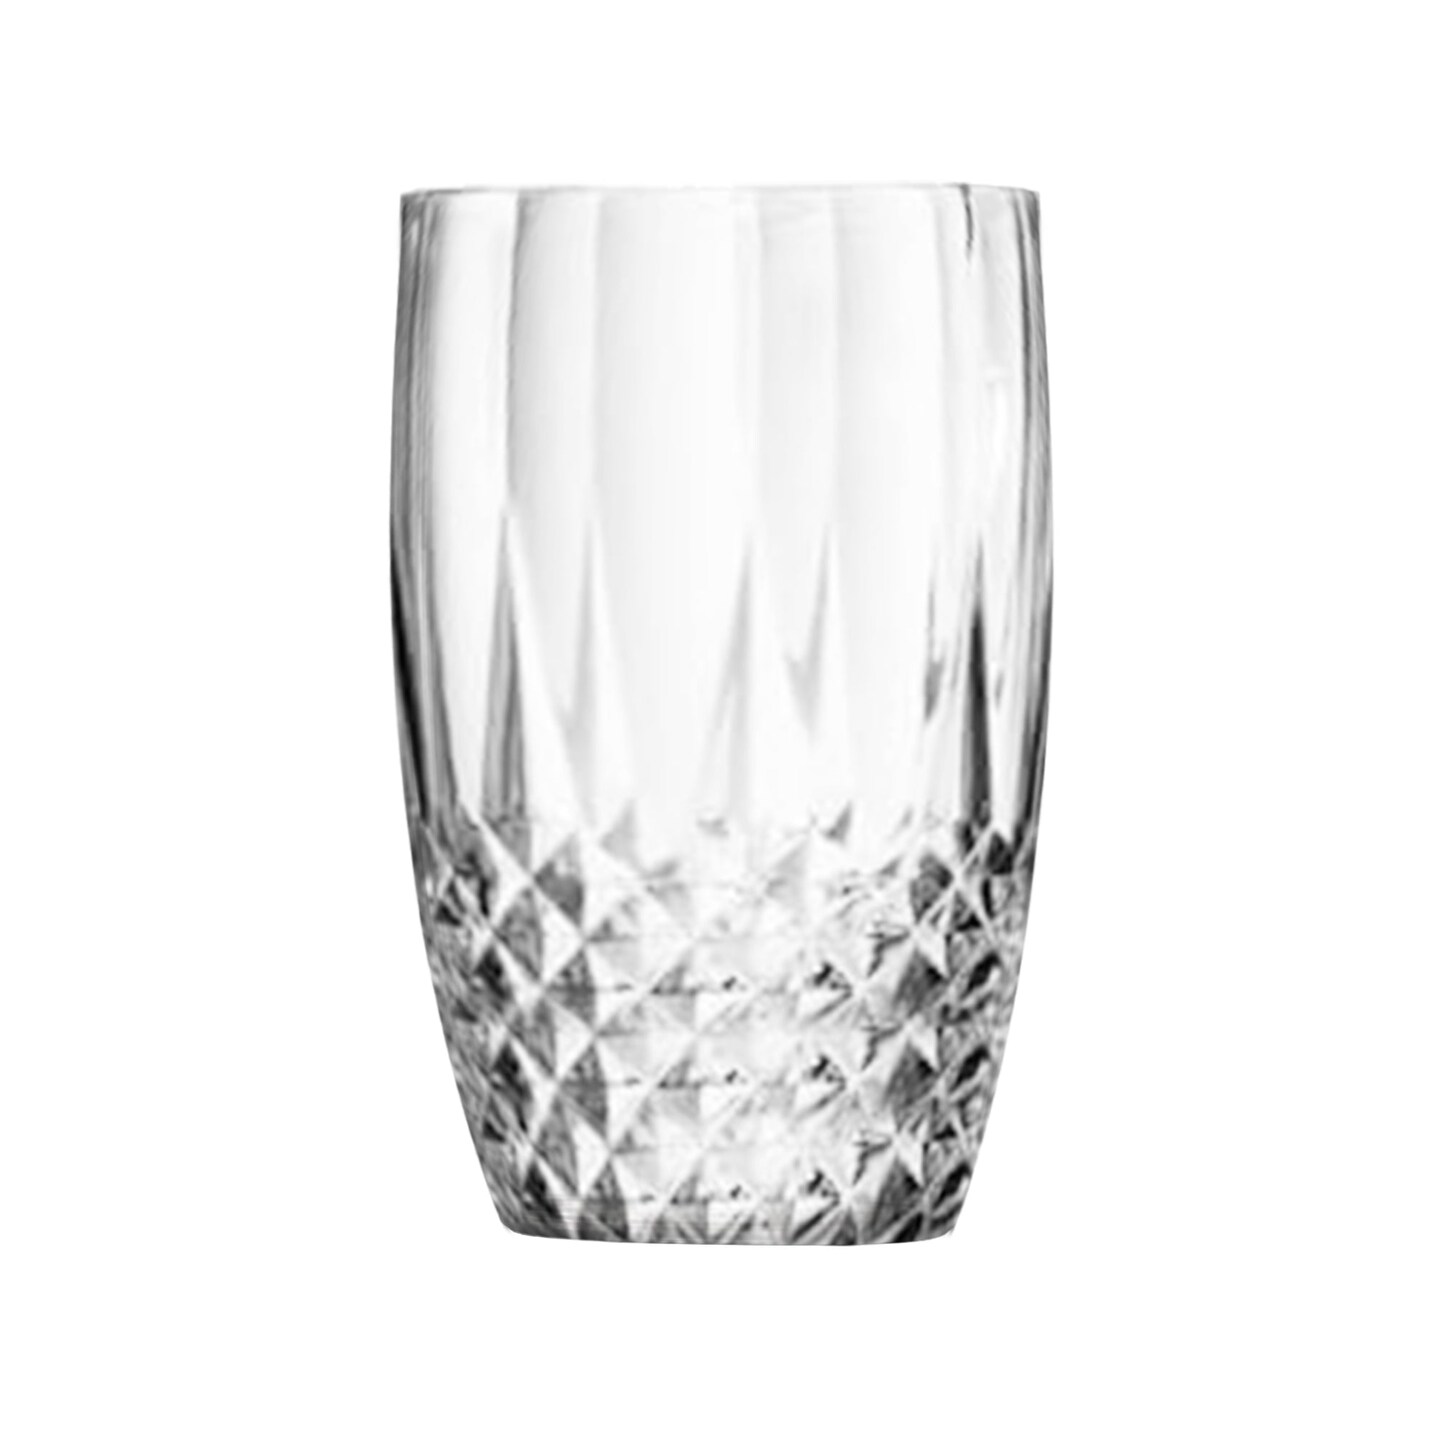 Clear Stripe Round Disposable Plastic Tumblers - 16 Ounce (48 Tumblers)